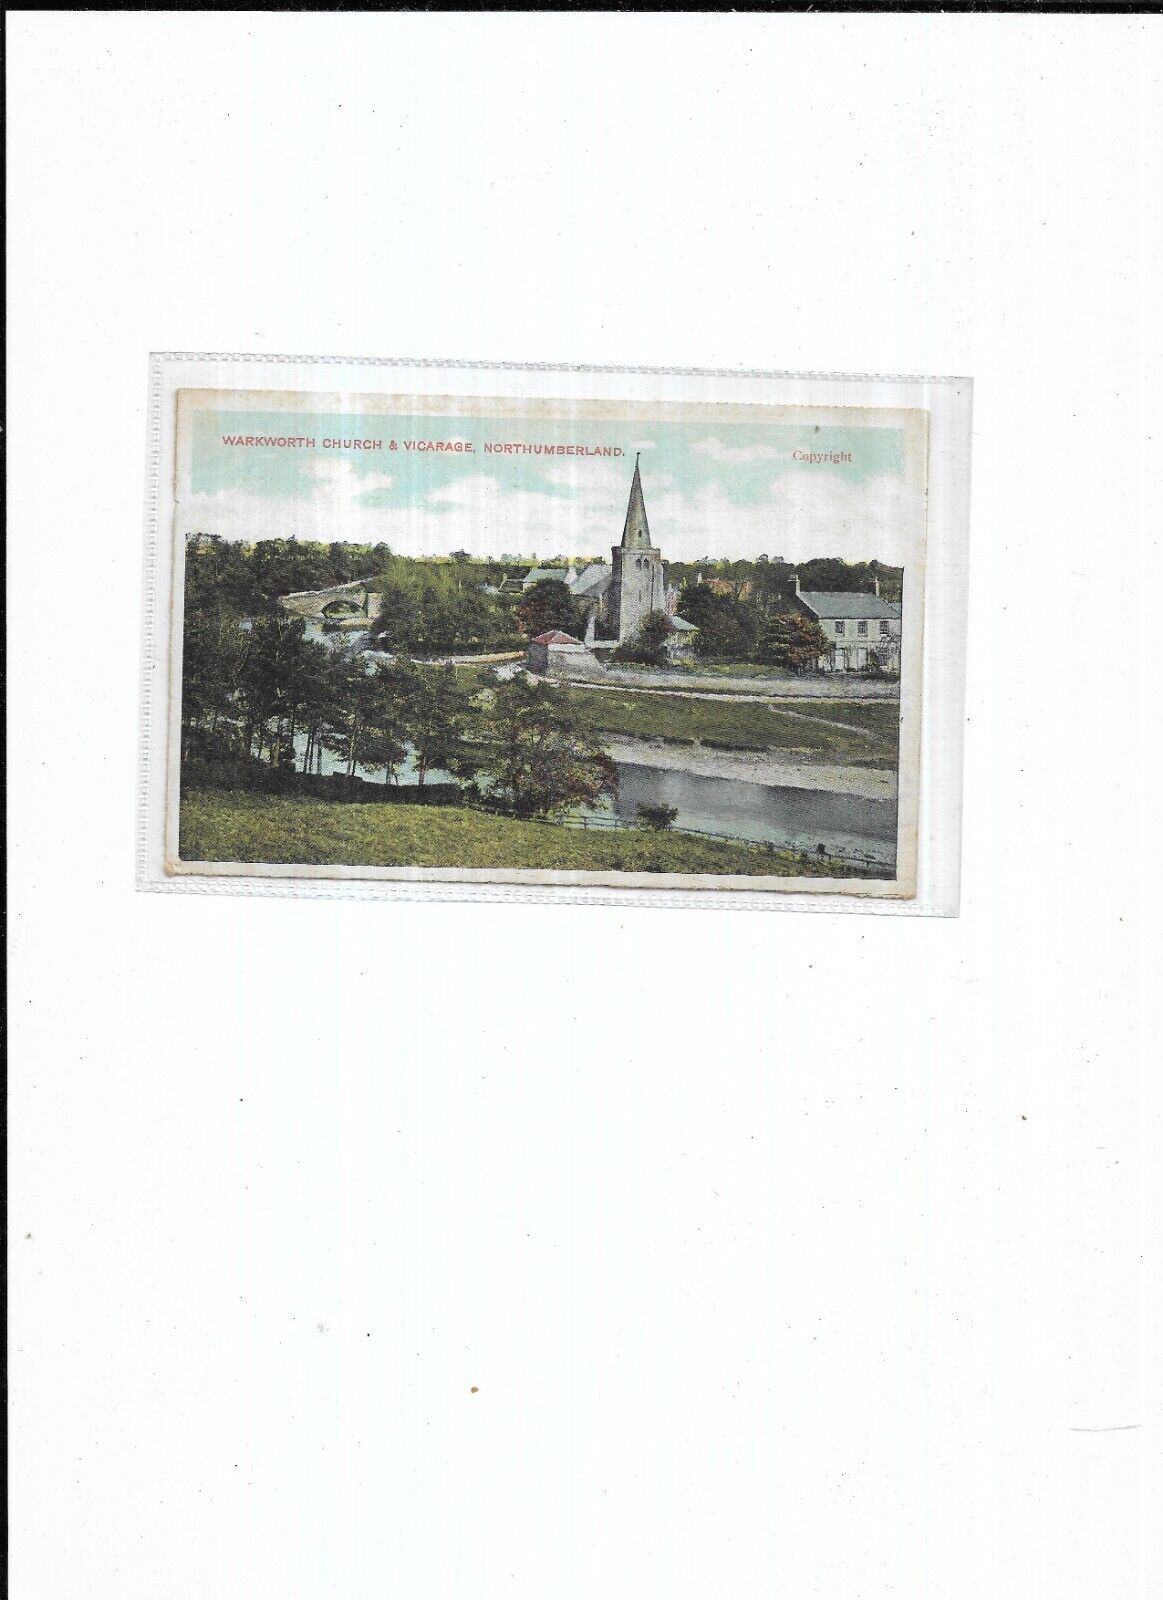 House Clearance - Northumberland Service "Warkworth Church & Vicarage" Date Unknown